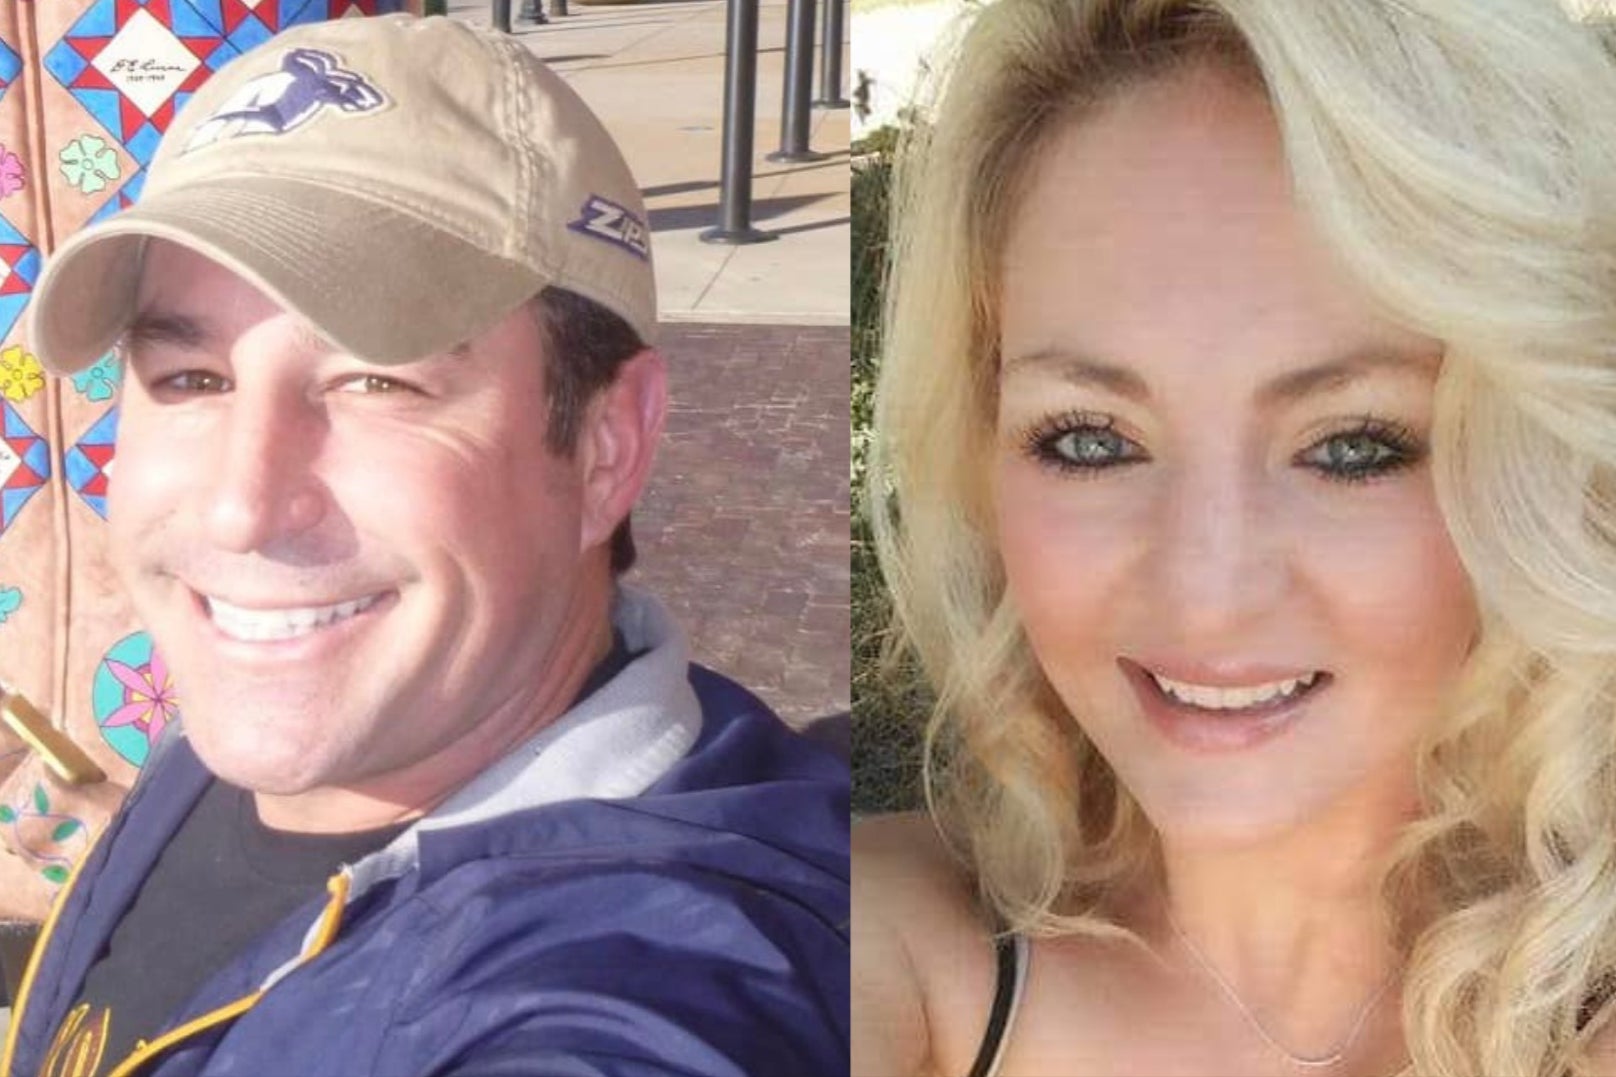 Jonas Bare, 50, and Cynthia Hovesepian, 37, both of Tennessee, vanished while visiting Alaska last week